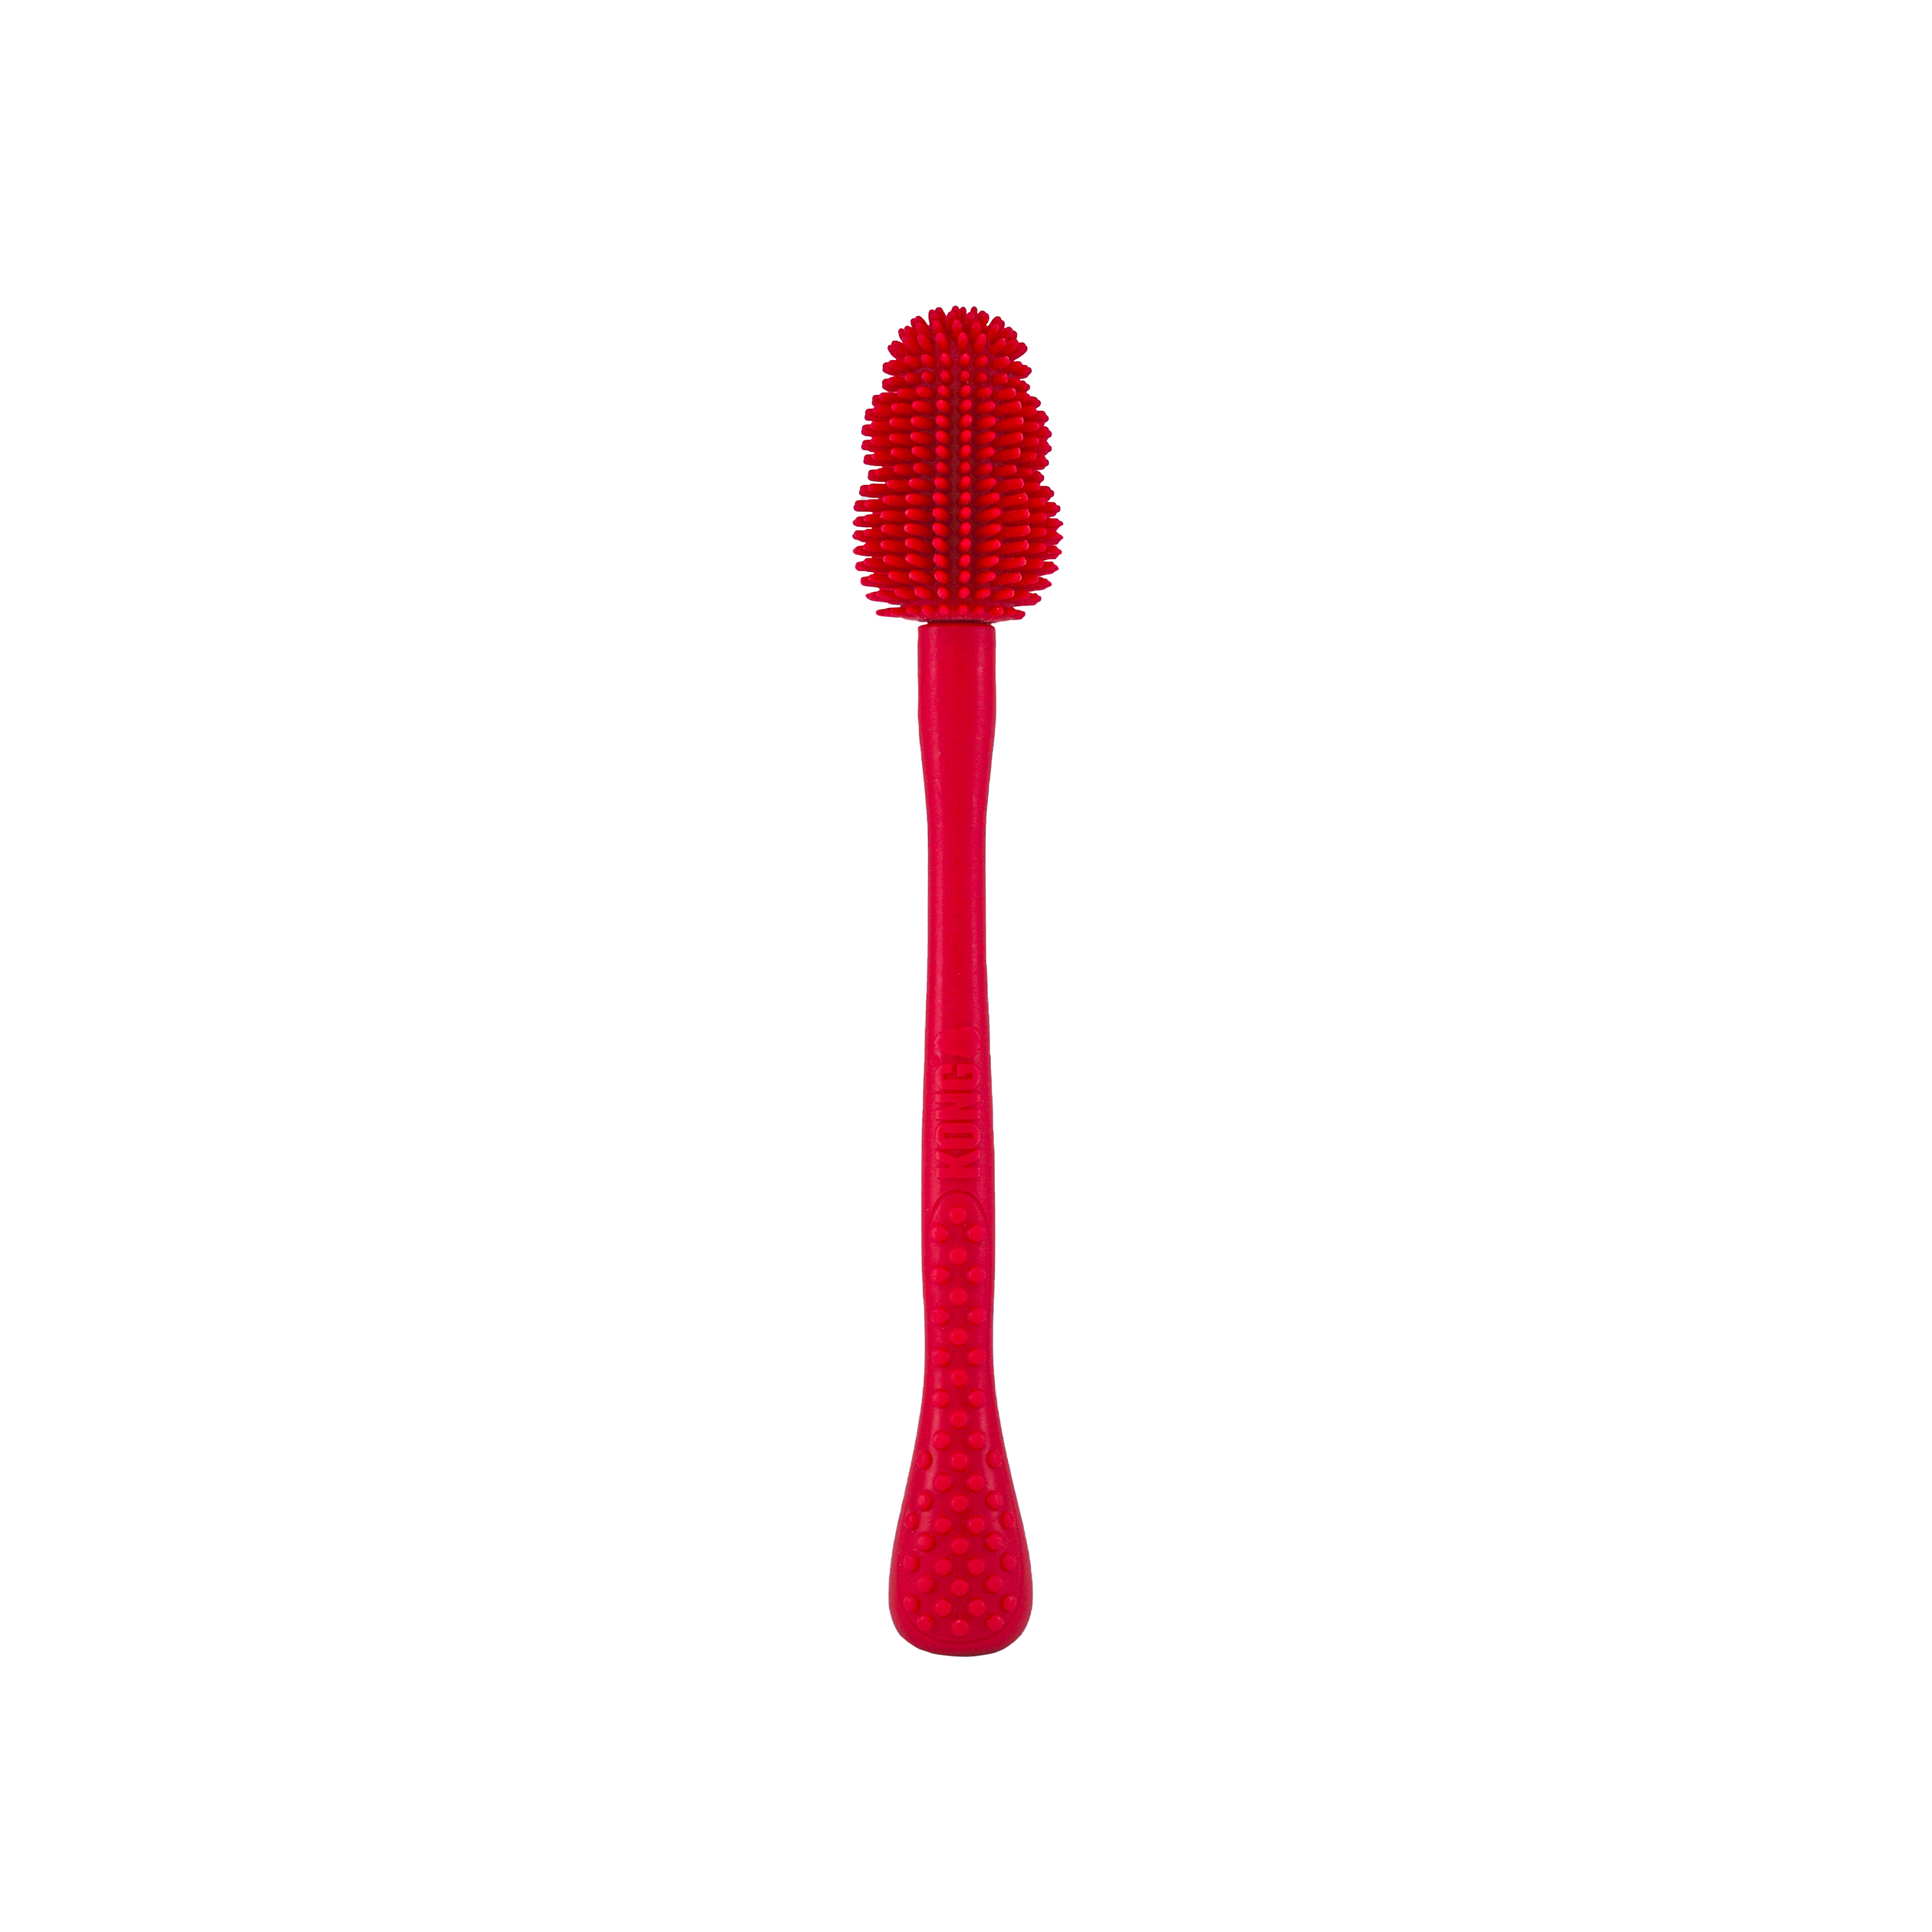 KONG Cleaning Brush offpack imagen de producto